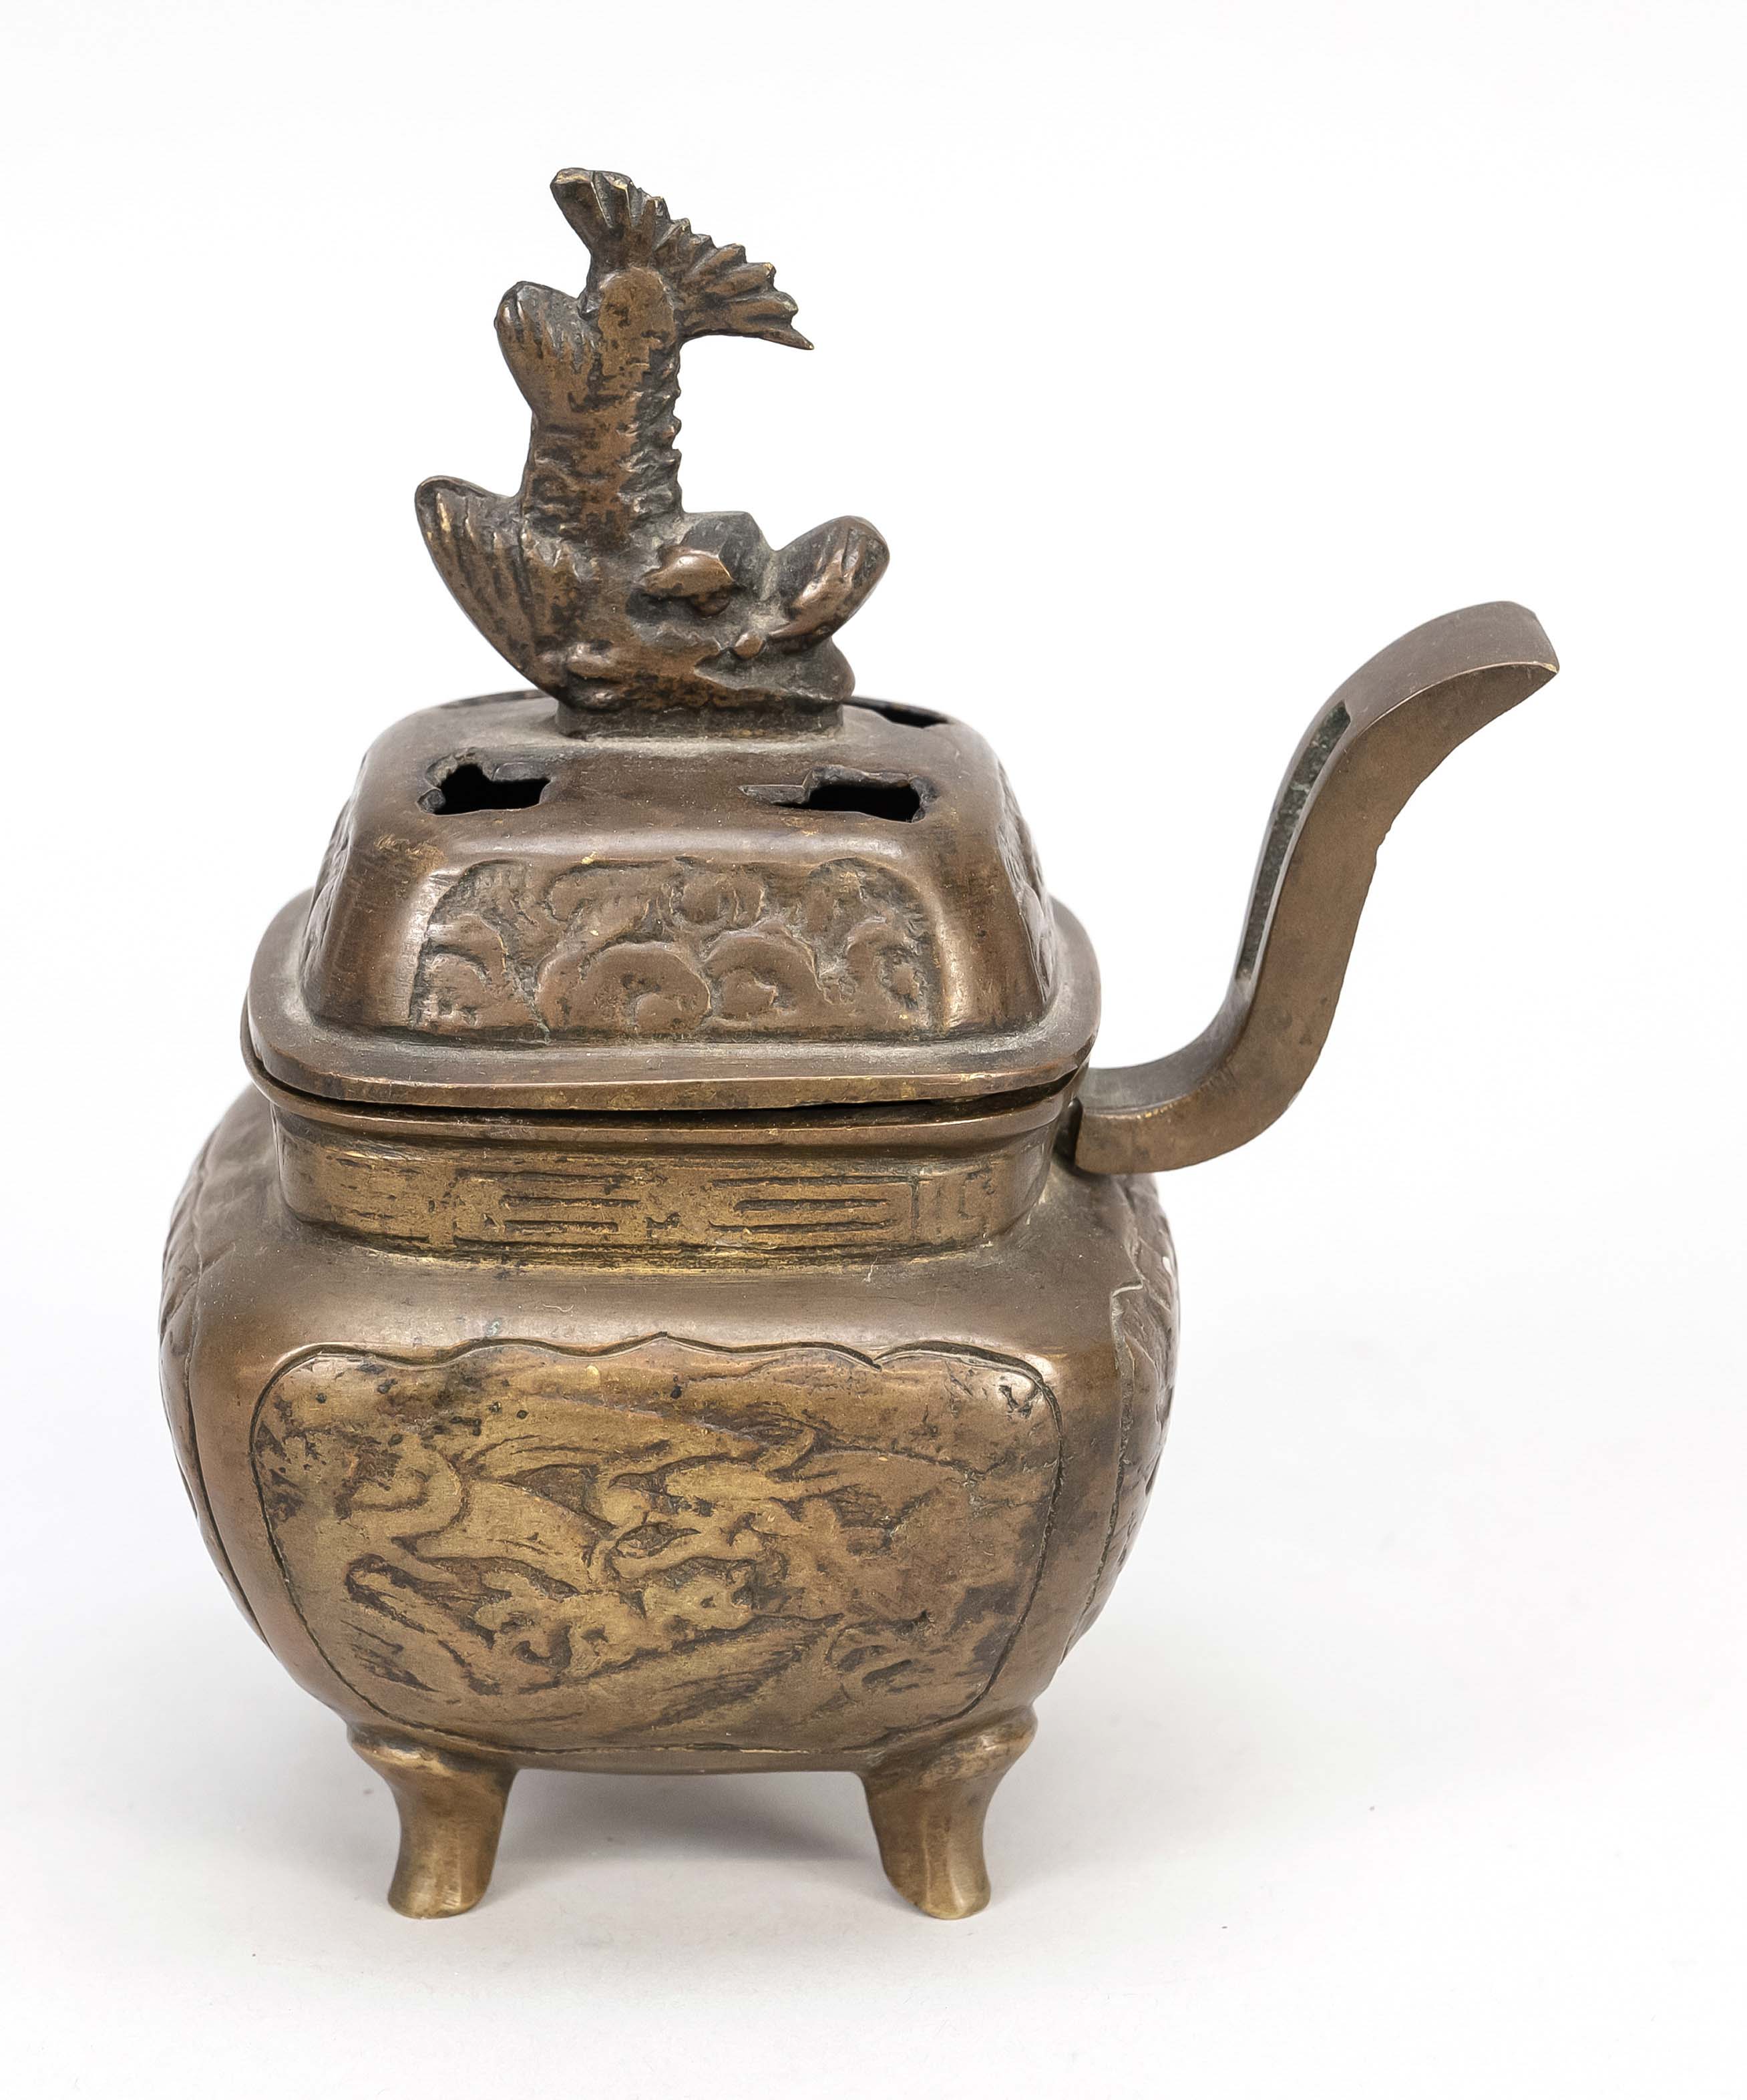 Square incense burner, China, probably Qing dynasty(1644-1911) 18th/19th century, bronze in the